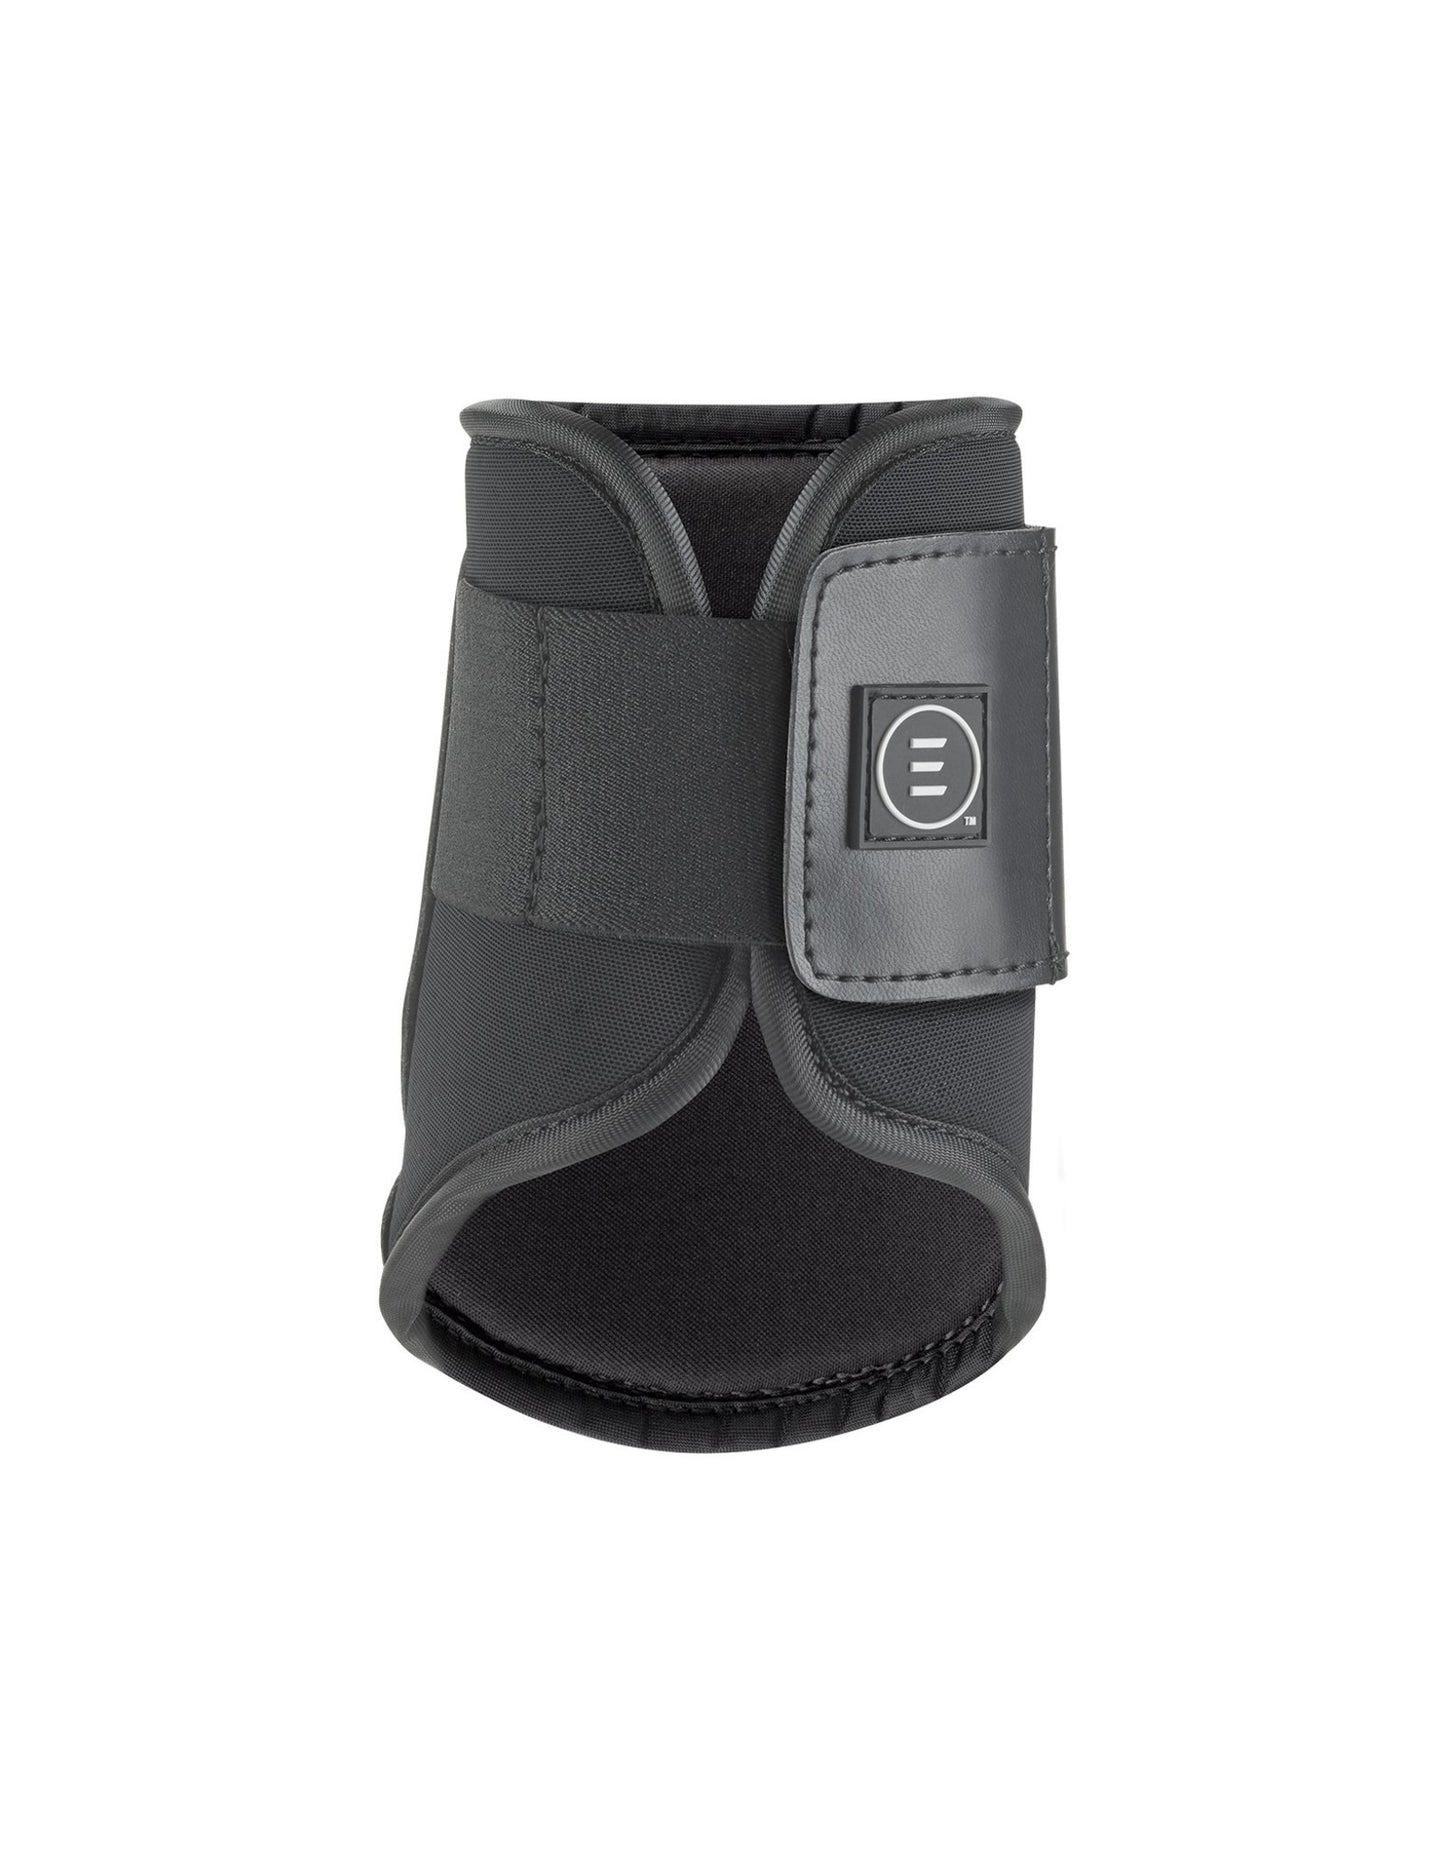 Equifit Everyday essential hind boots